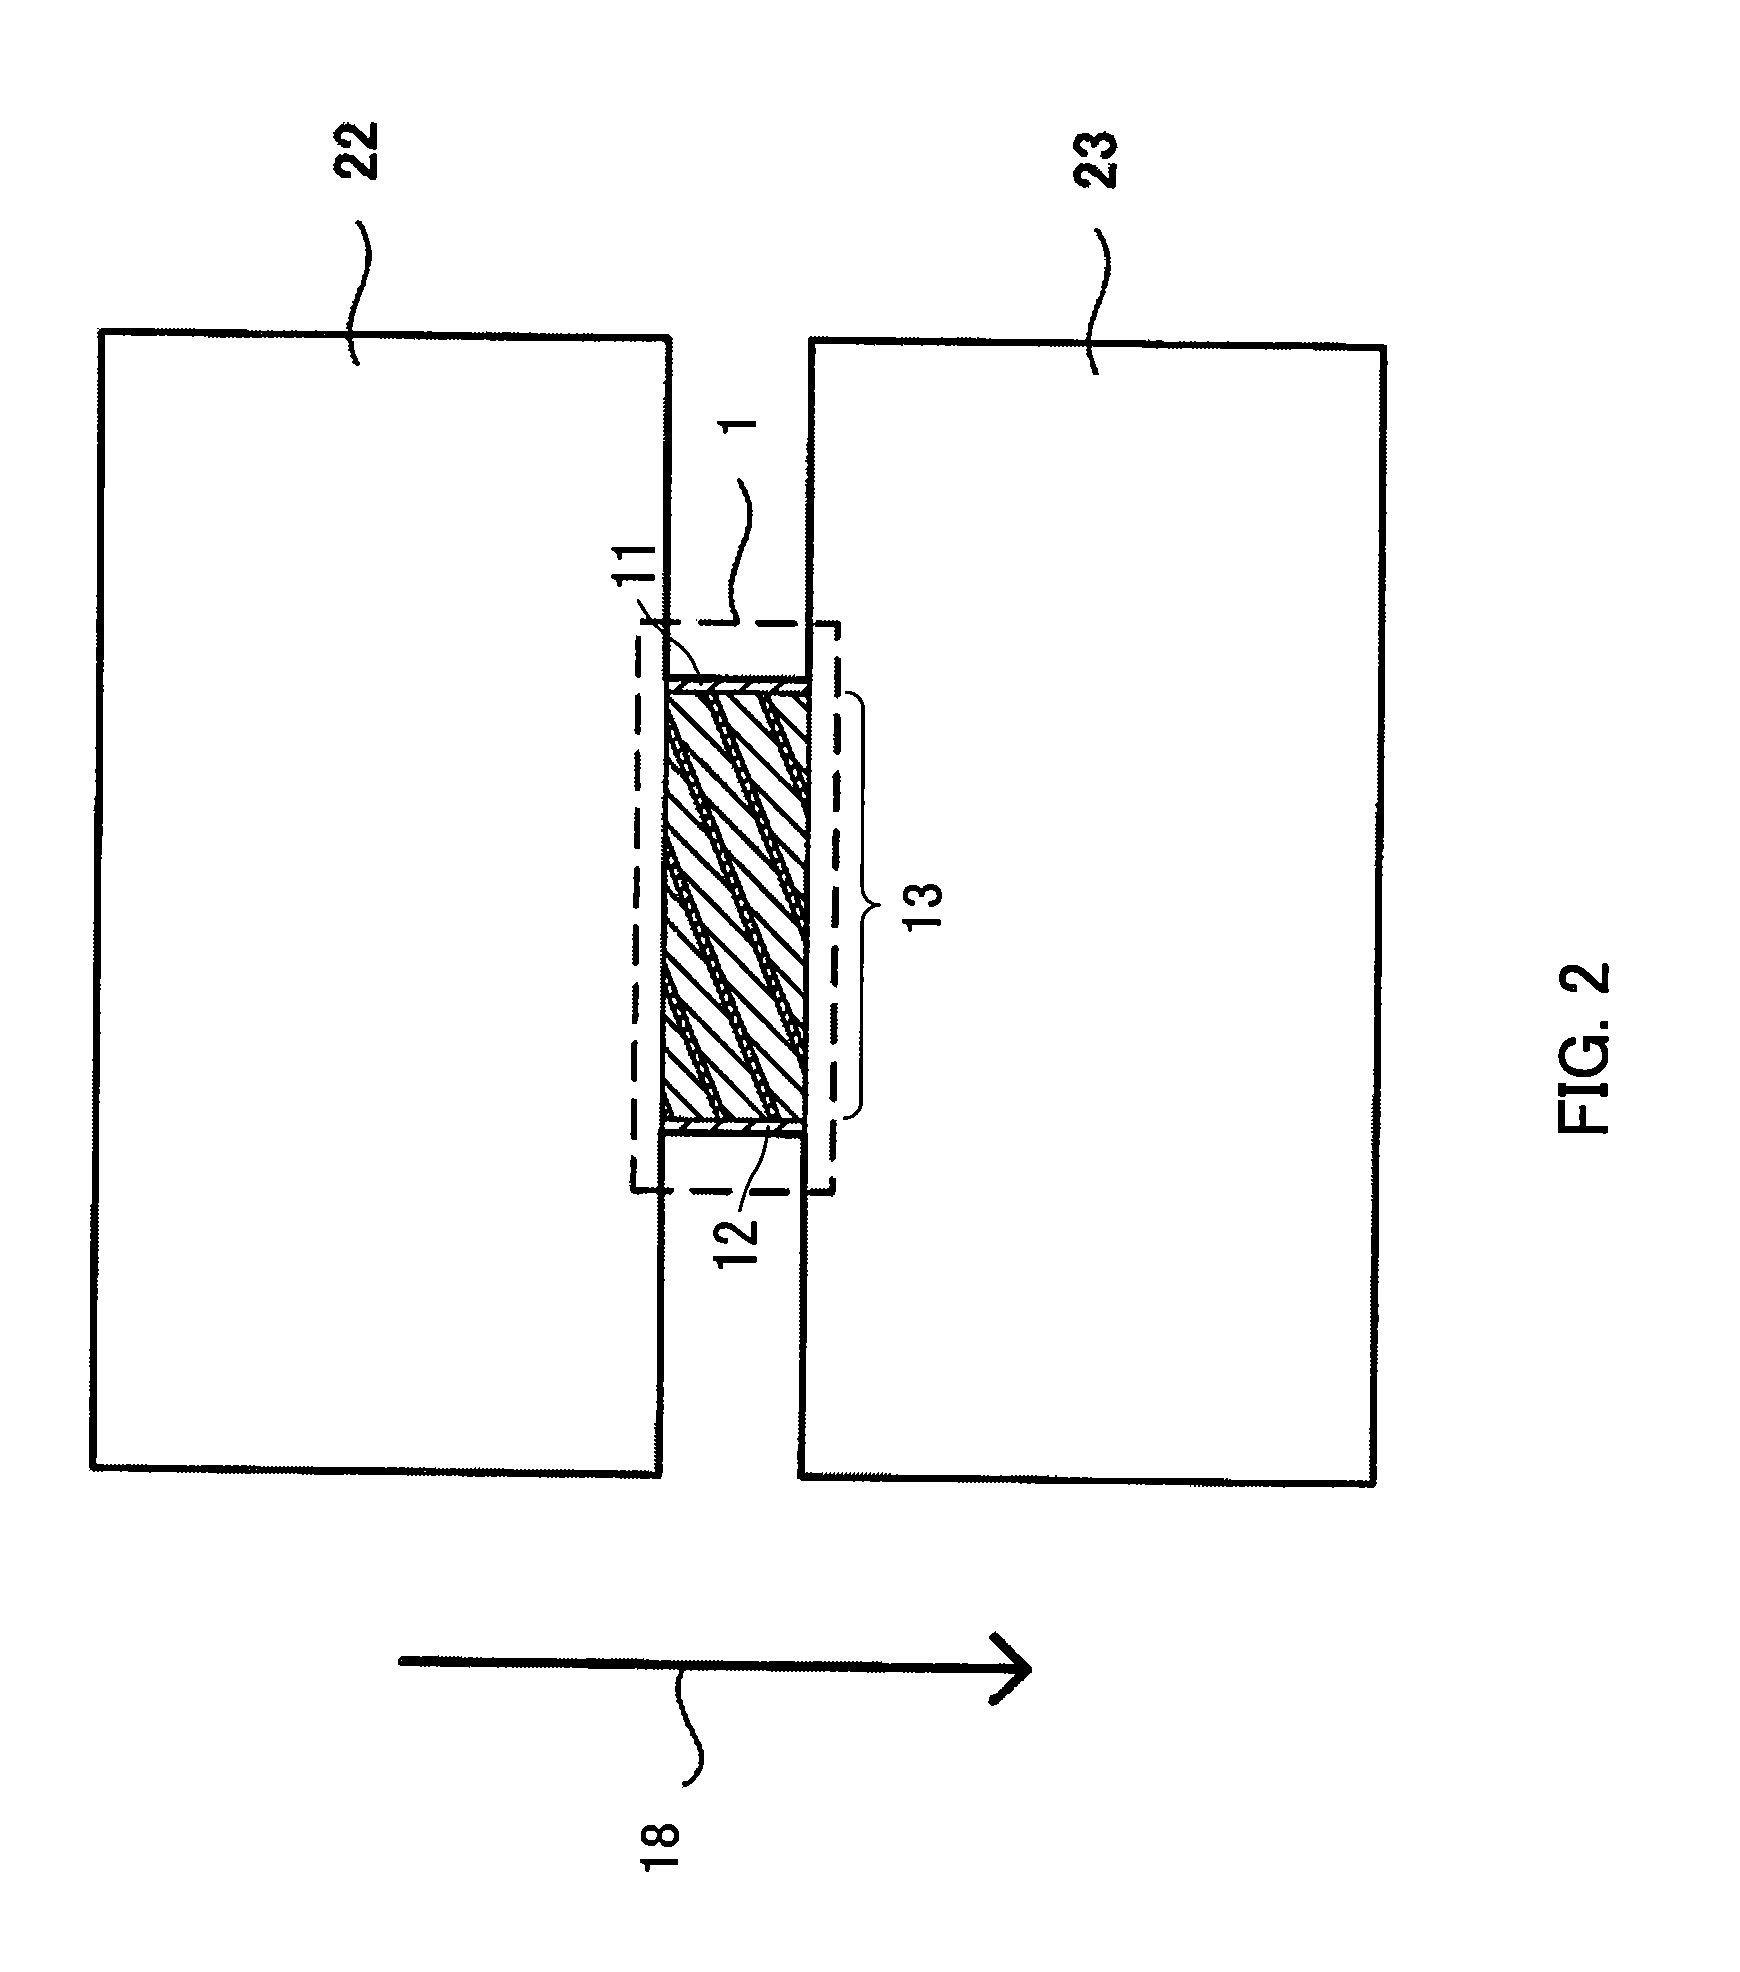 Power generation method using thermoelectric element, thermoelectric element and fabrication method thereof, and thermoelectric device